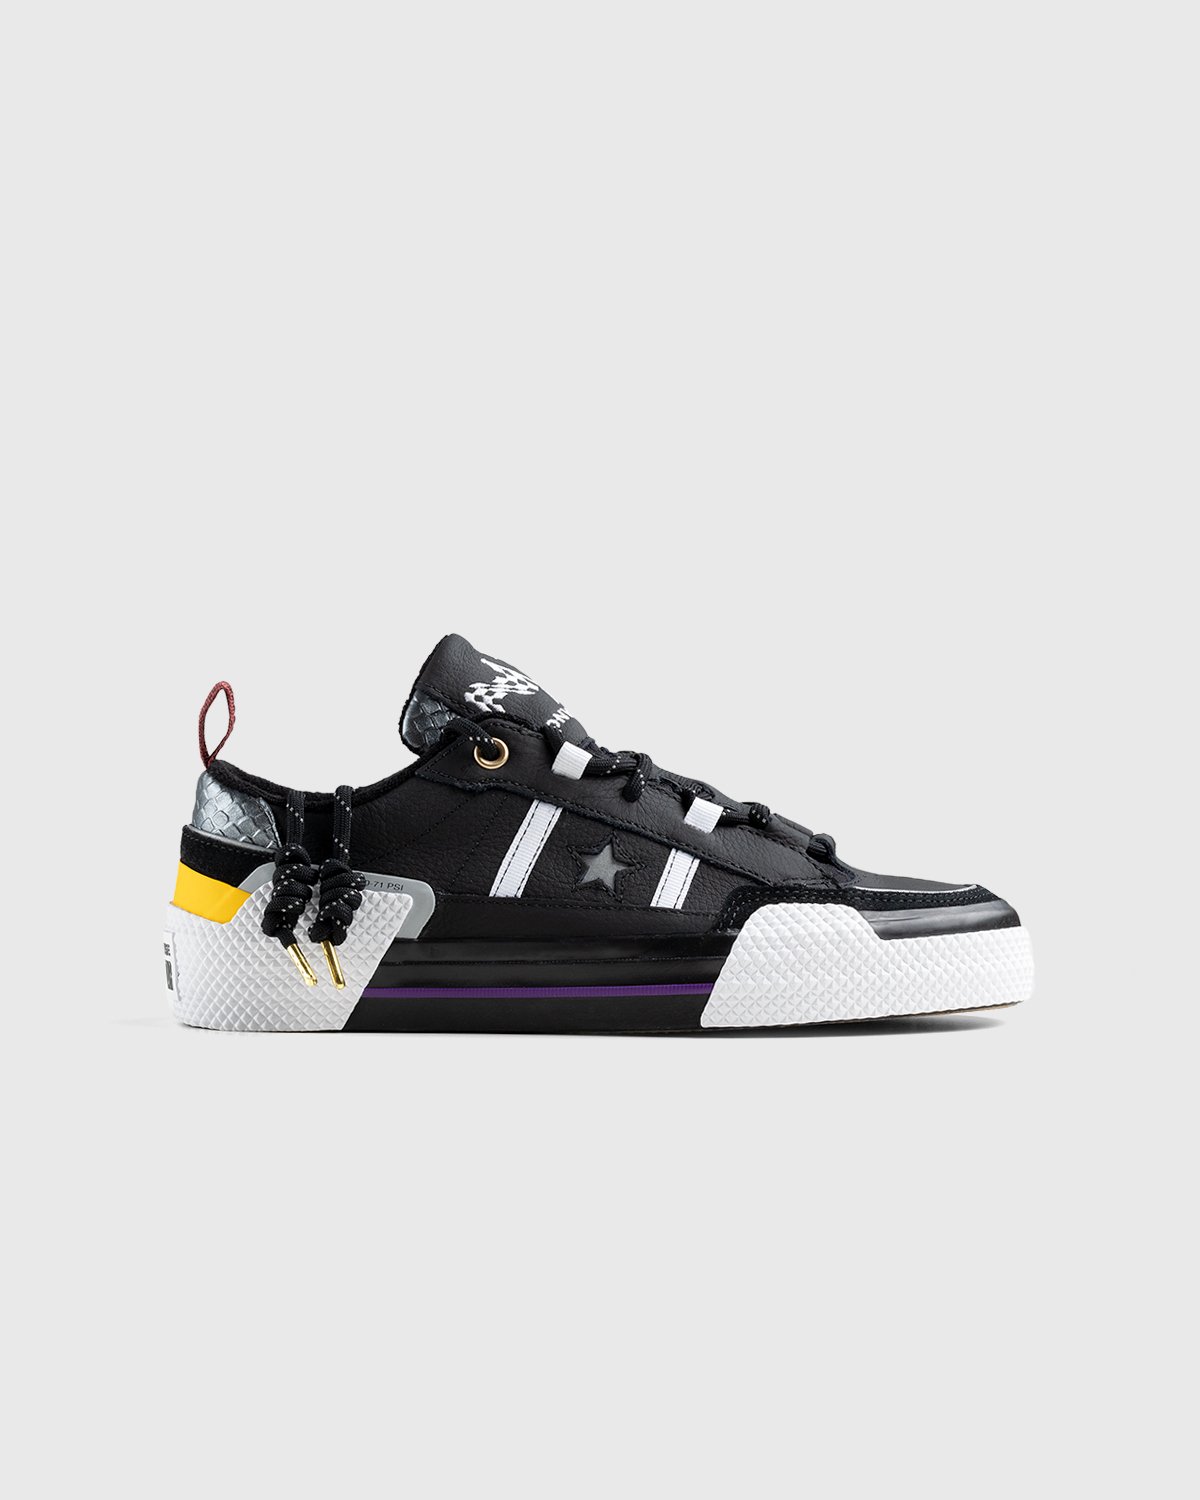 Converse x IBN Japser - One Star Ox Black/White/Spectra Yellow - Footwear - Black - Image 1